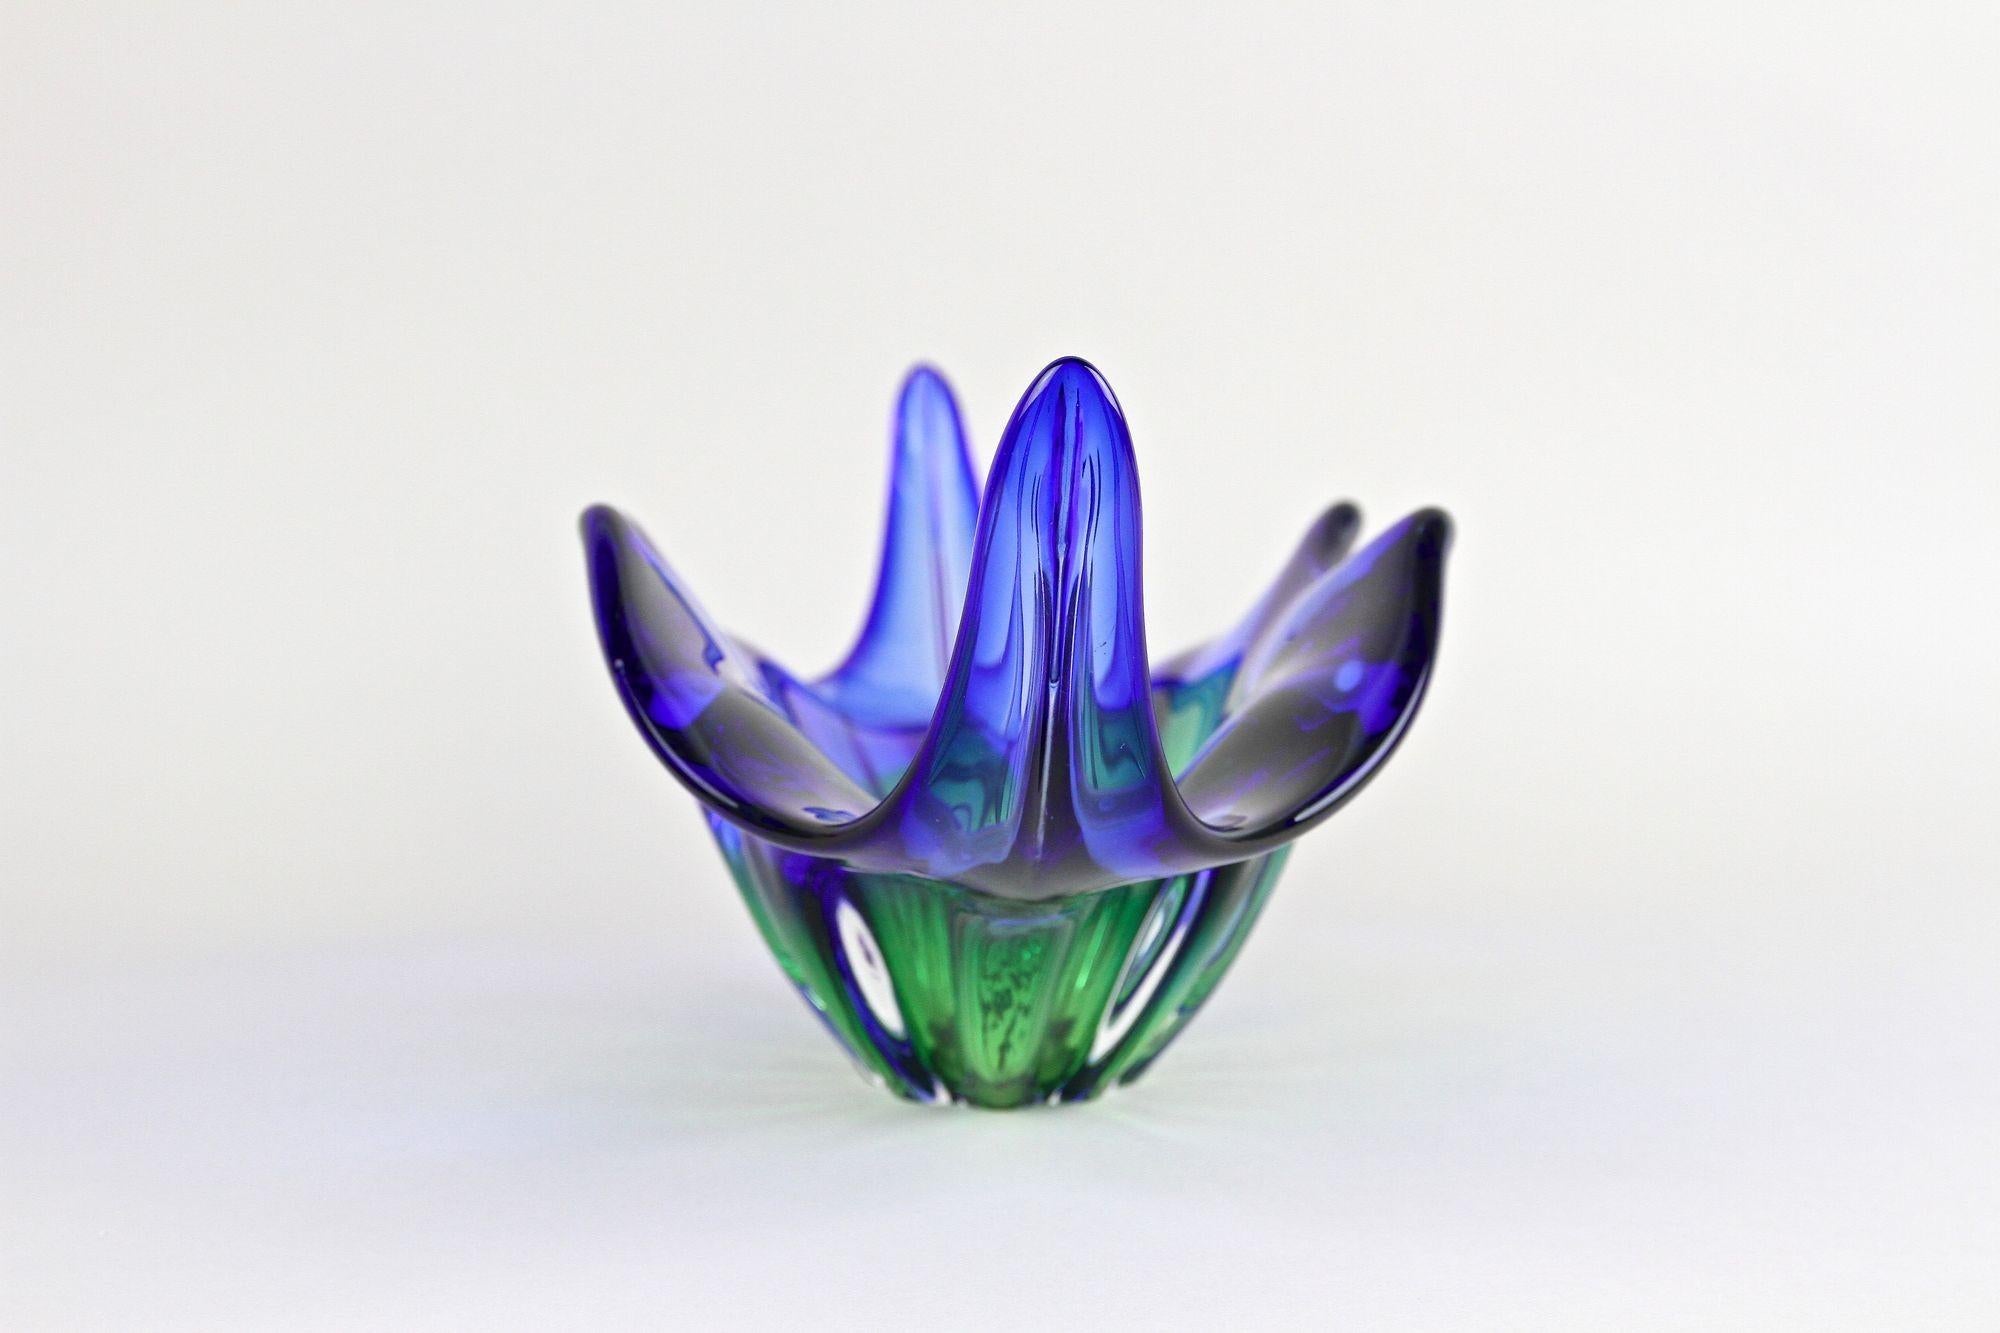 Mid-Century Modern 20th Century Murano Glass Bowl in Blue/ Green Tones - Mouthblown, IT ca. 1960/70